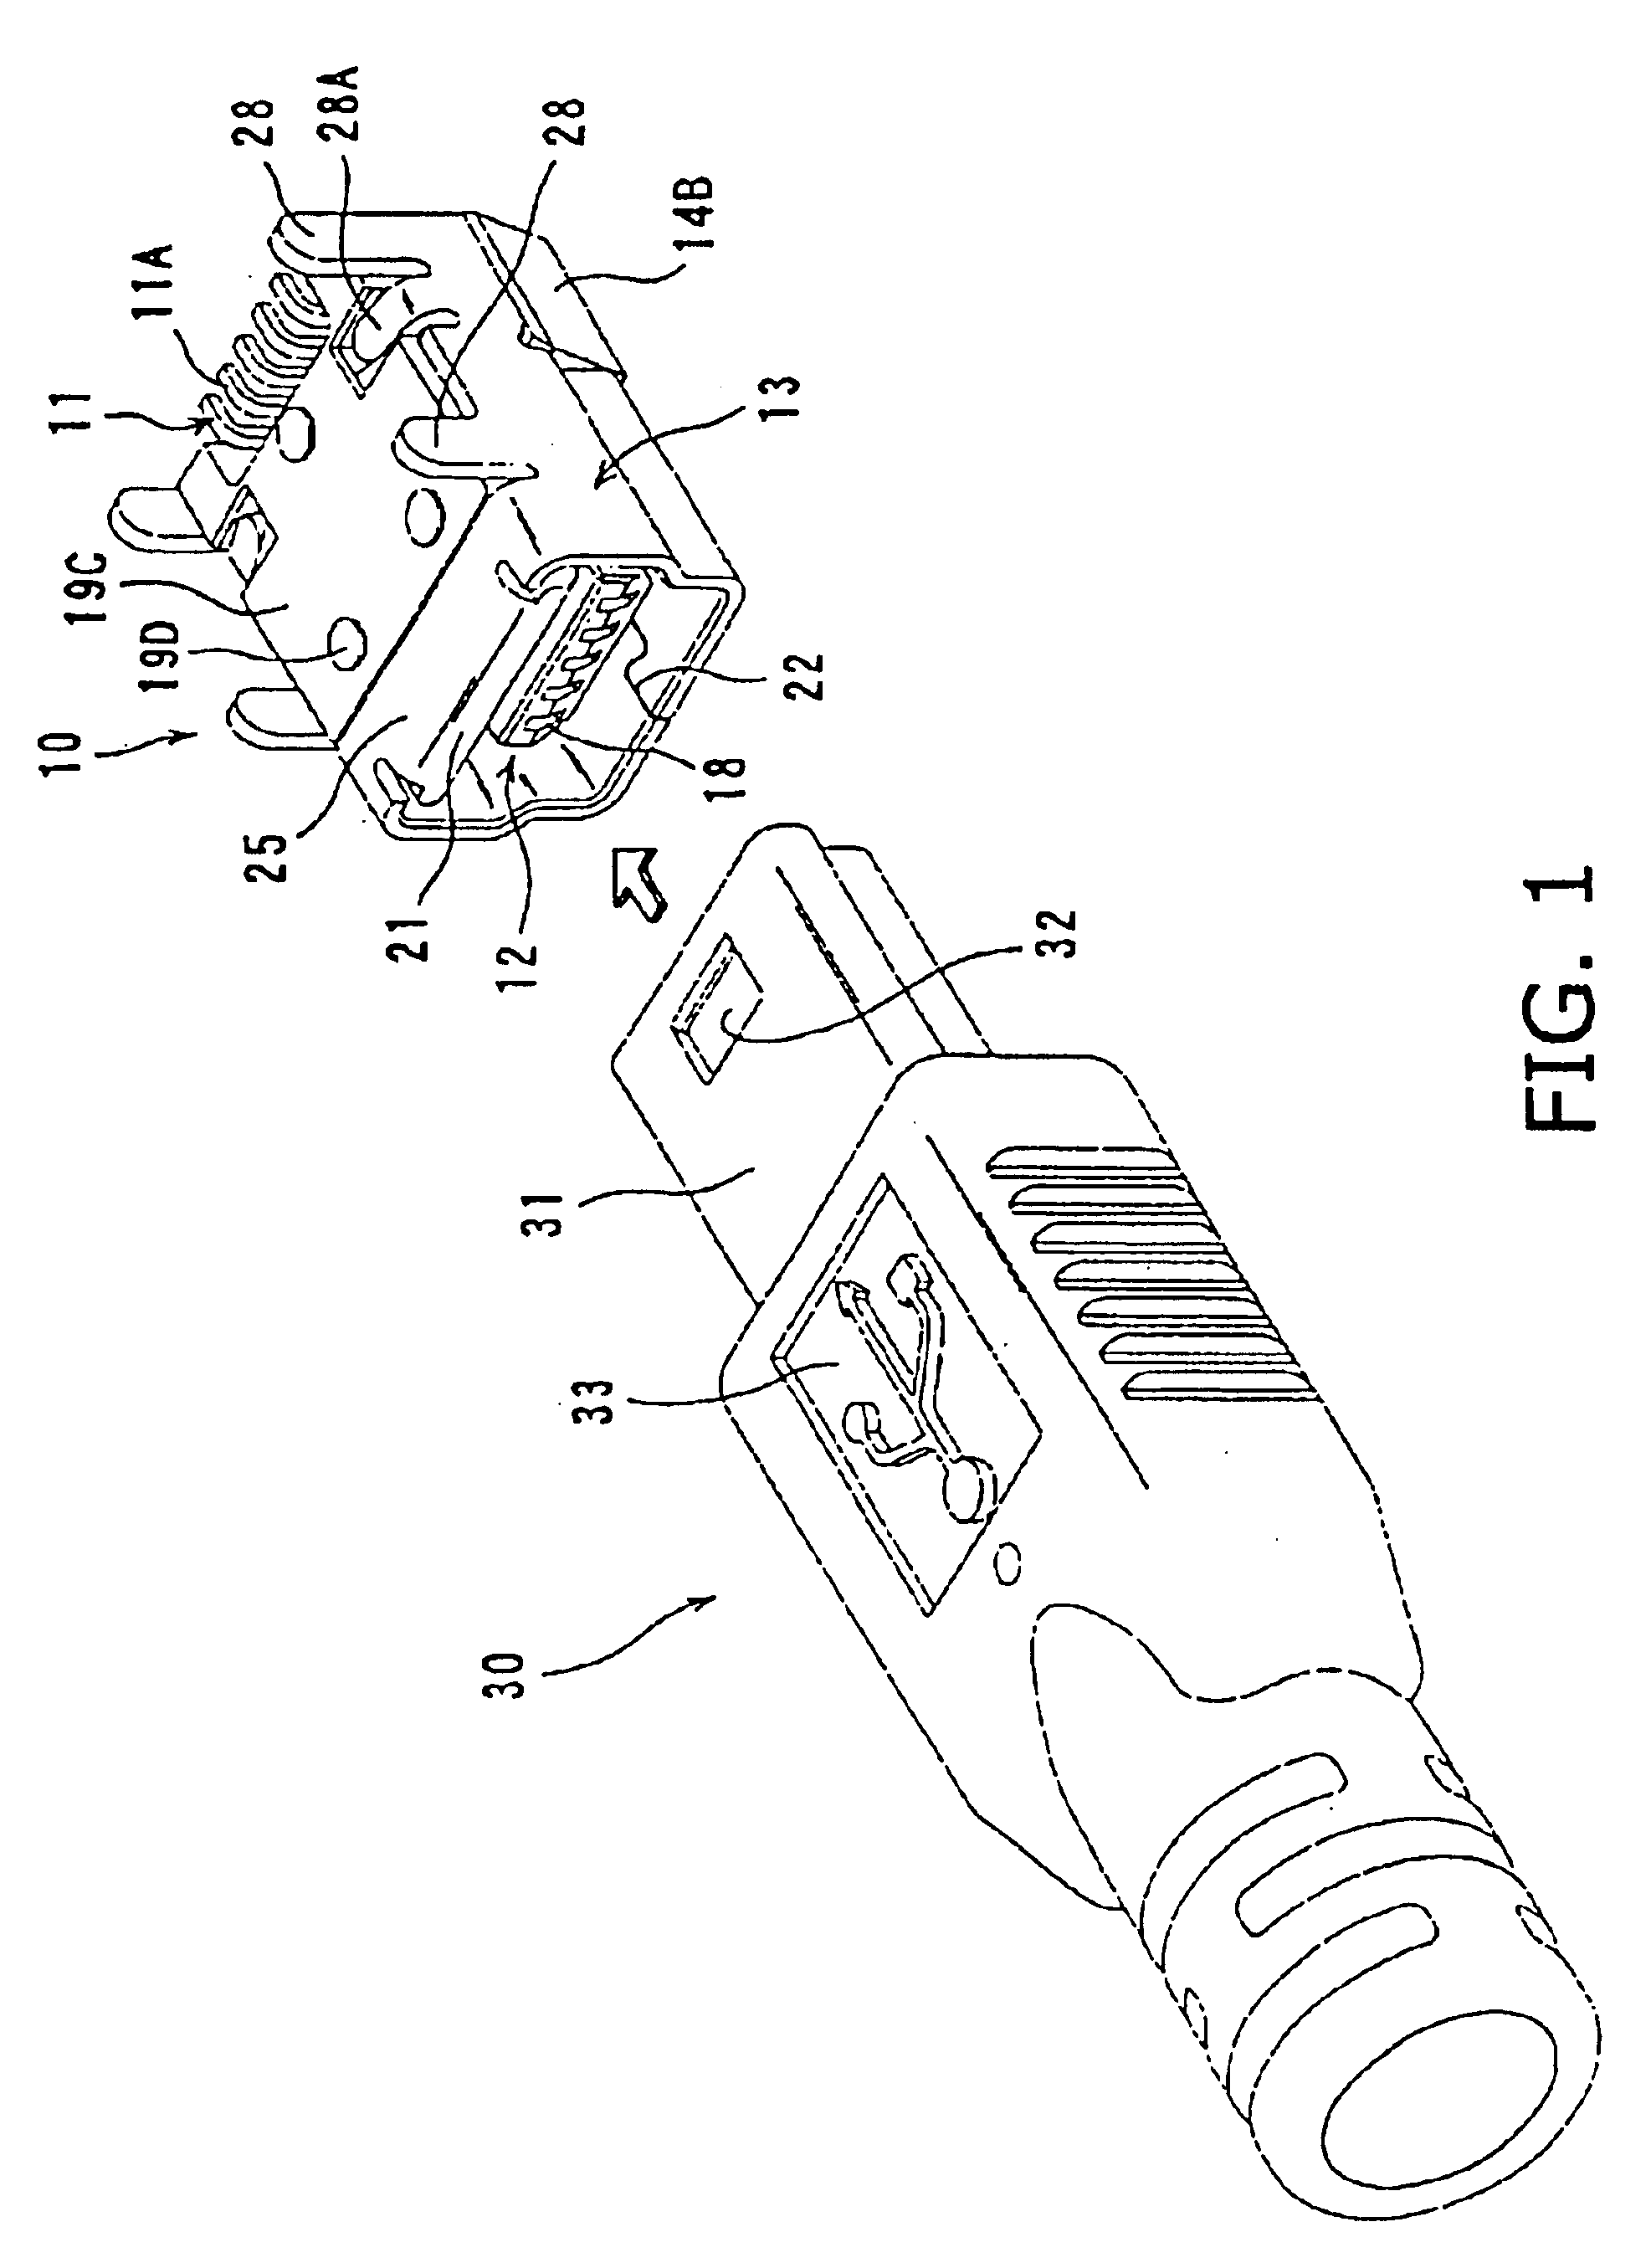 Electrical connector with lock and shield pieces in middle plane